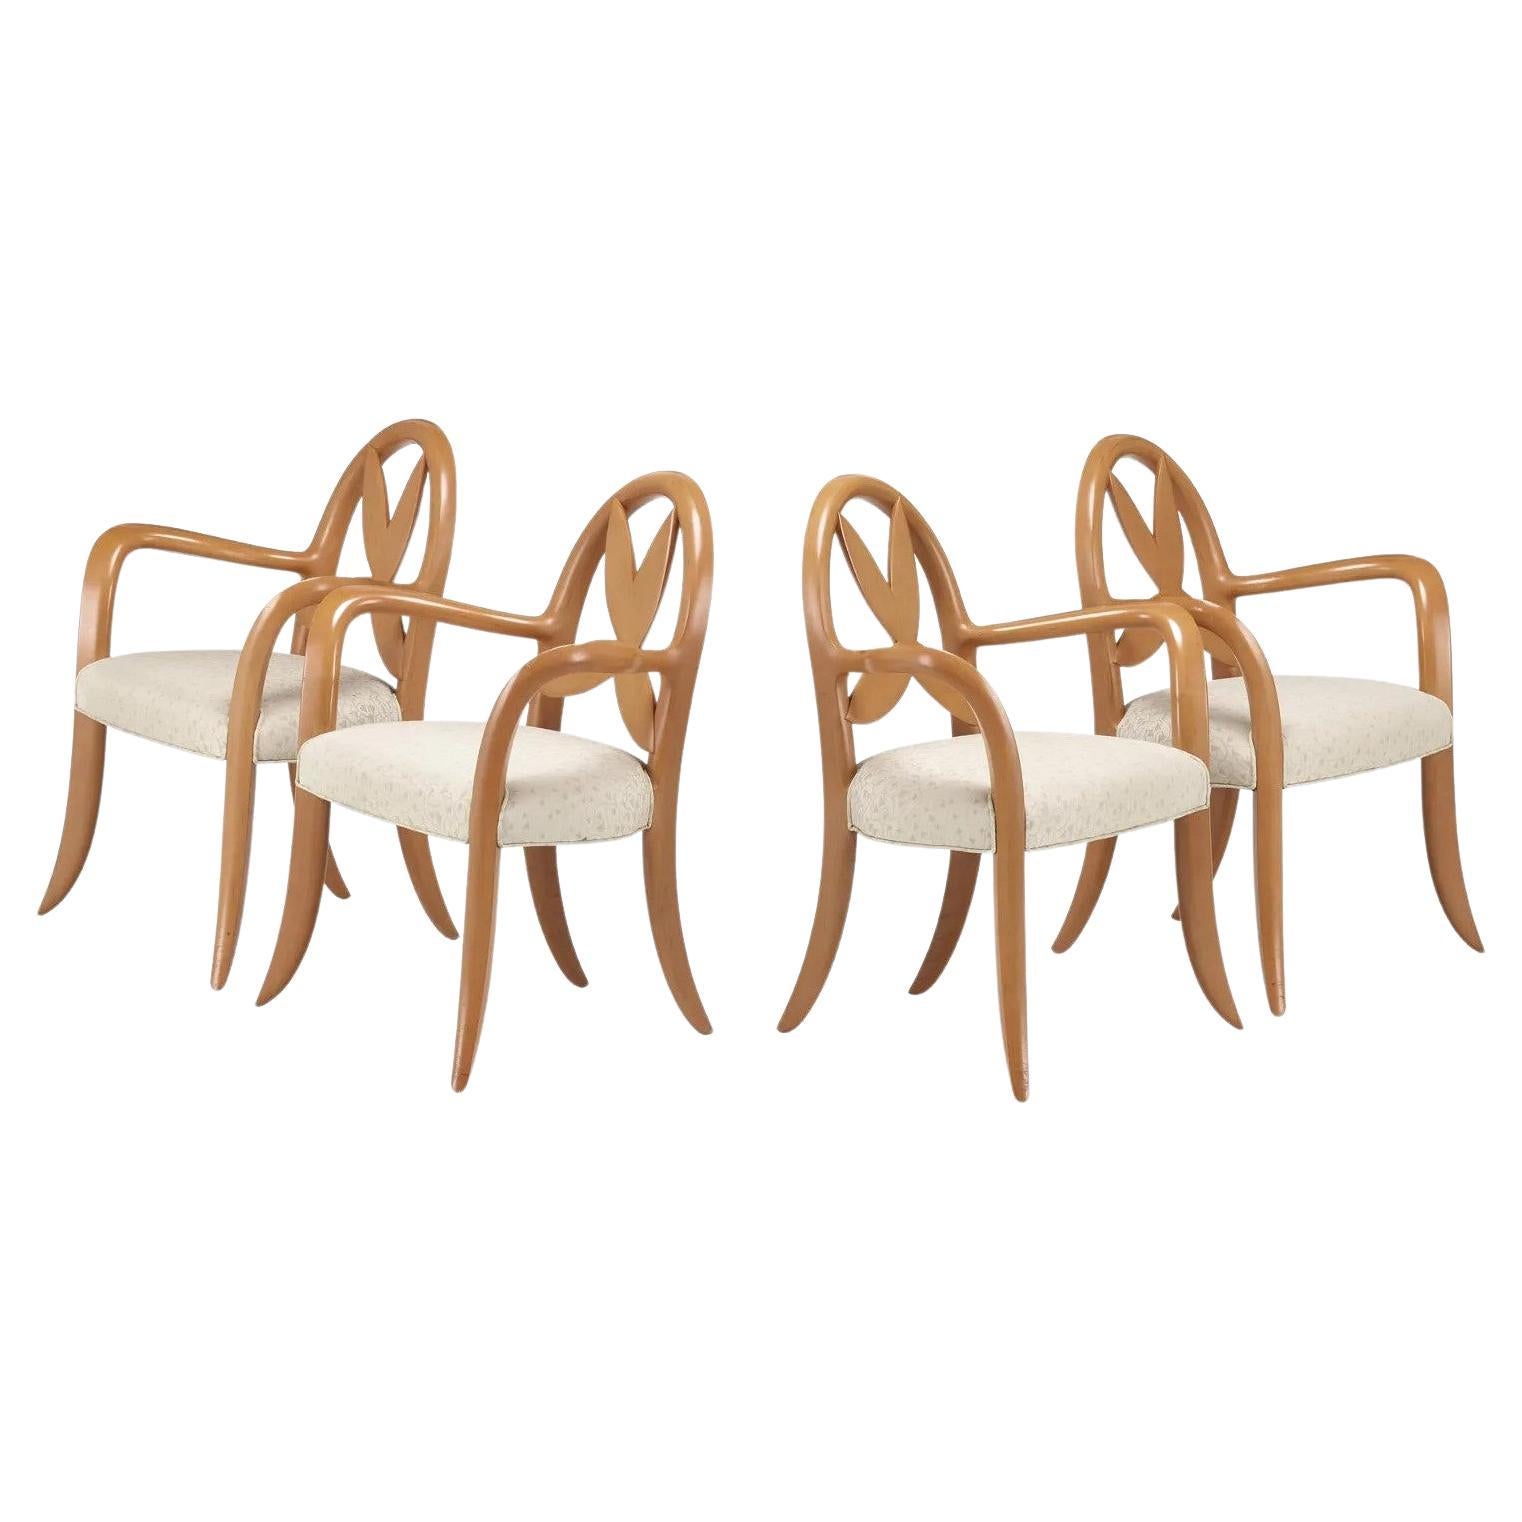 Wendell Castle Springborn Chairs, Set of 4 For Sale